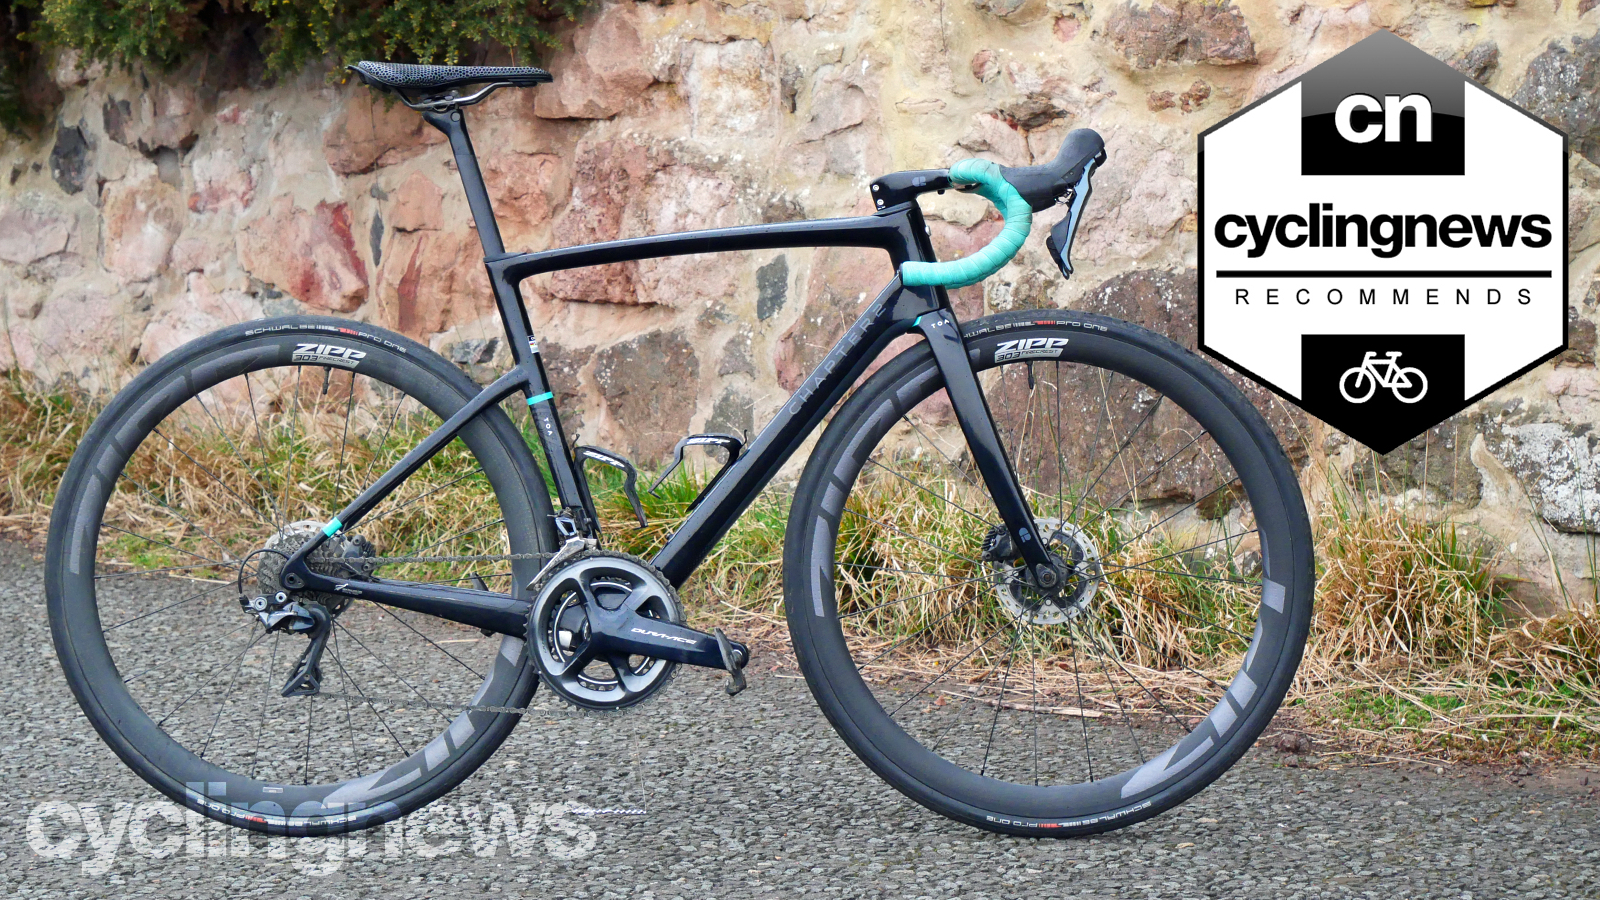 Chapter2 Toa review A race bike thats comfortable, fast and easy to live with Cyclingnews